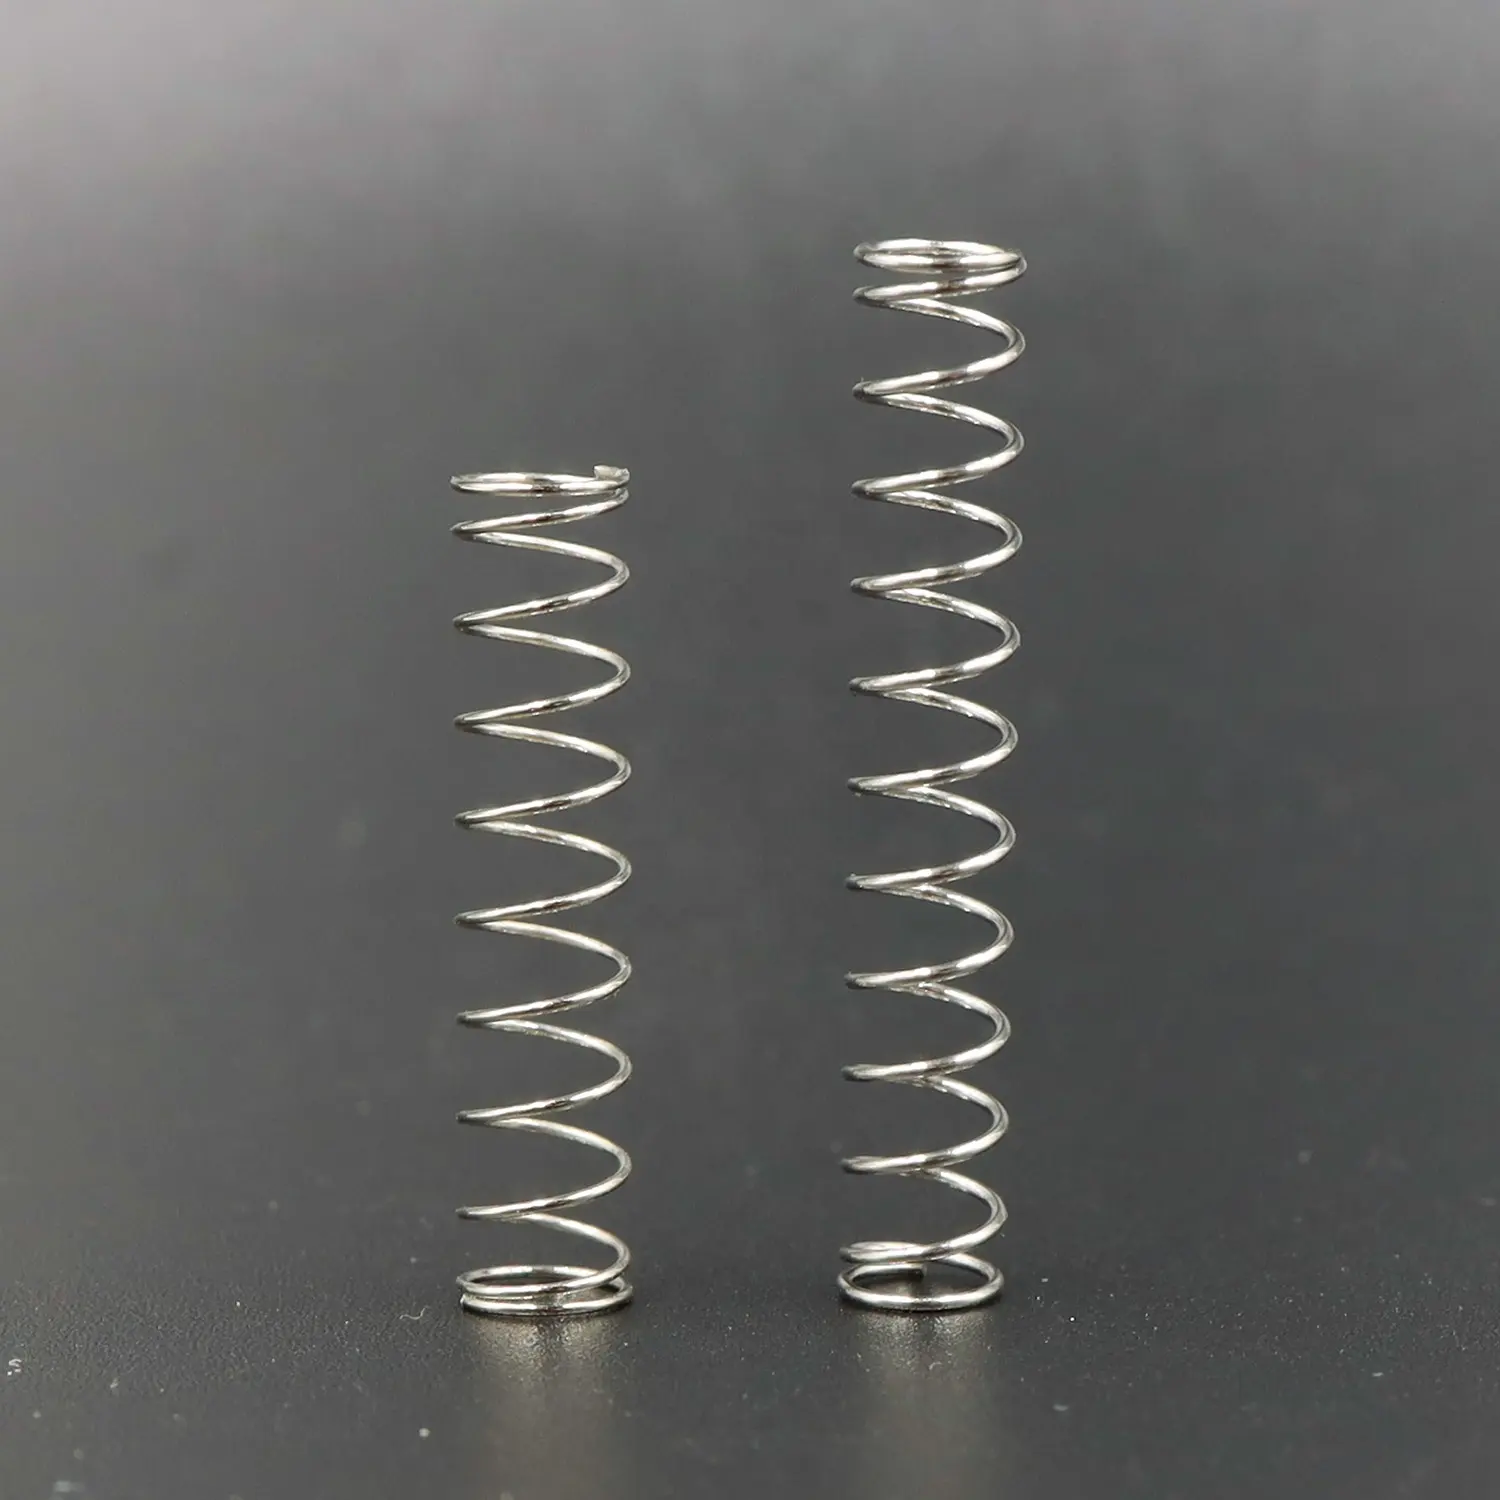 0.5mm/0.4mm Wire Diameter Small Stainless Steel Compression Springs